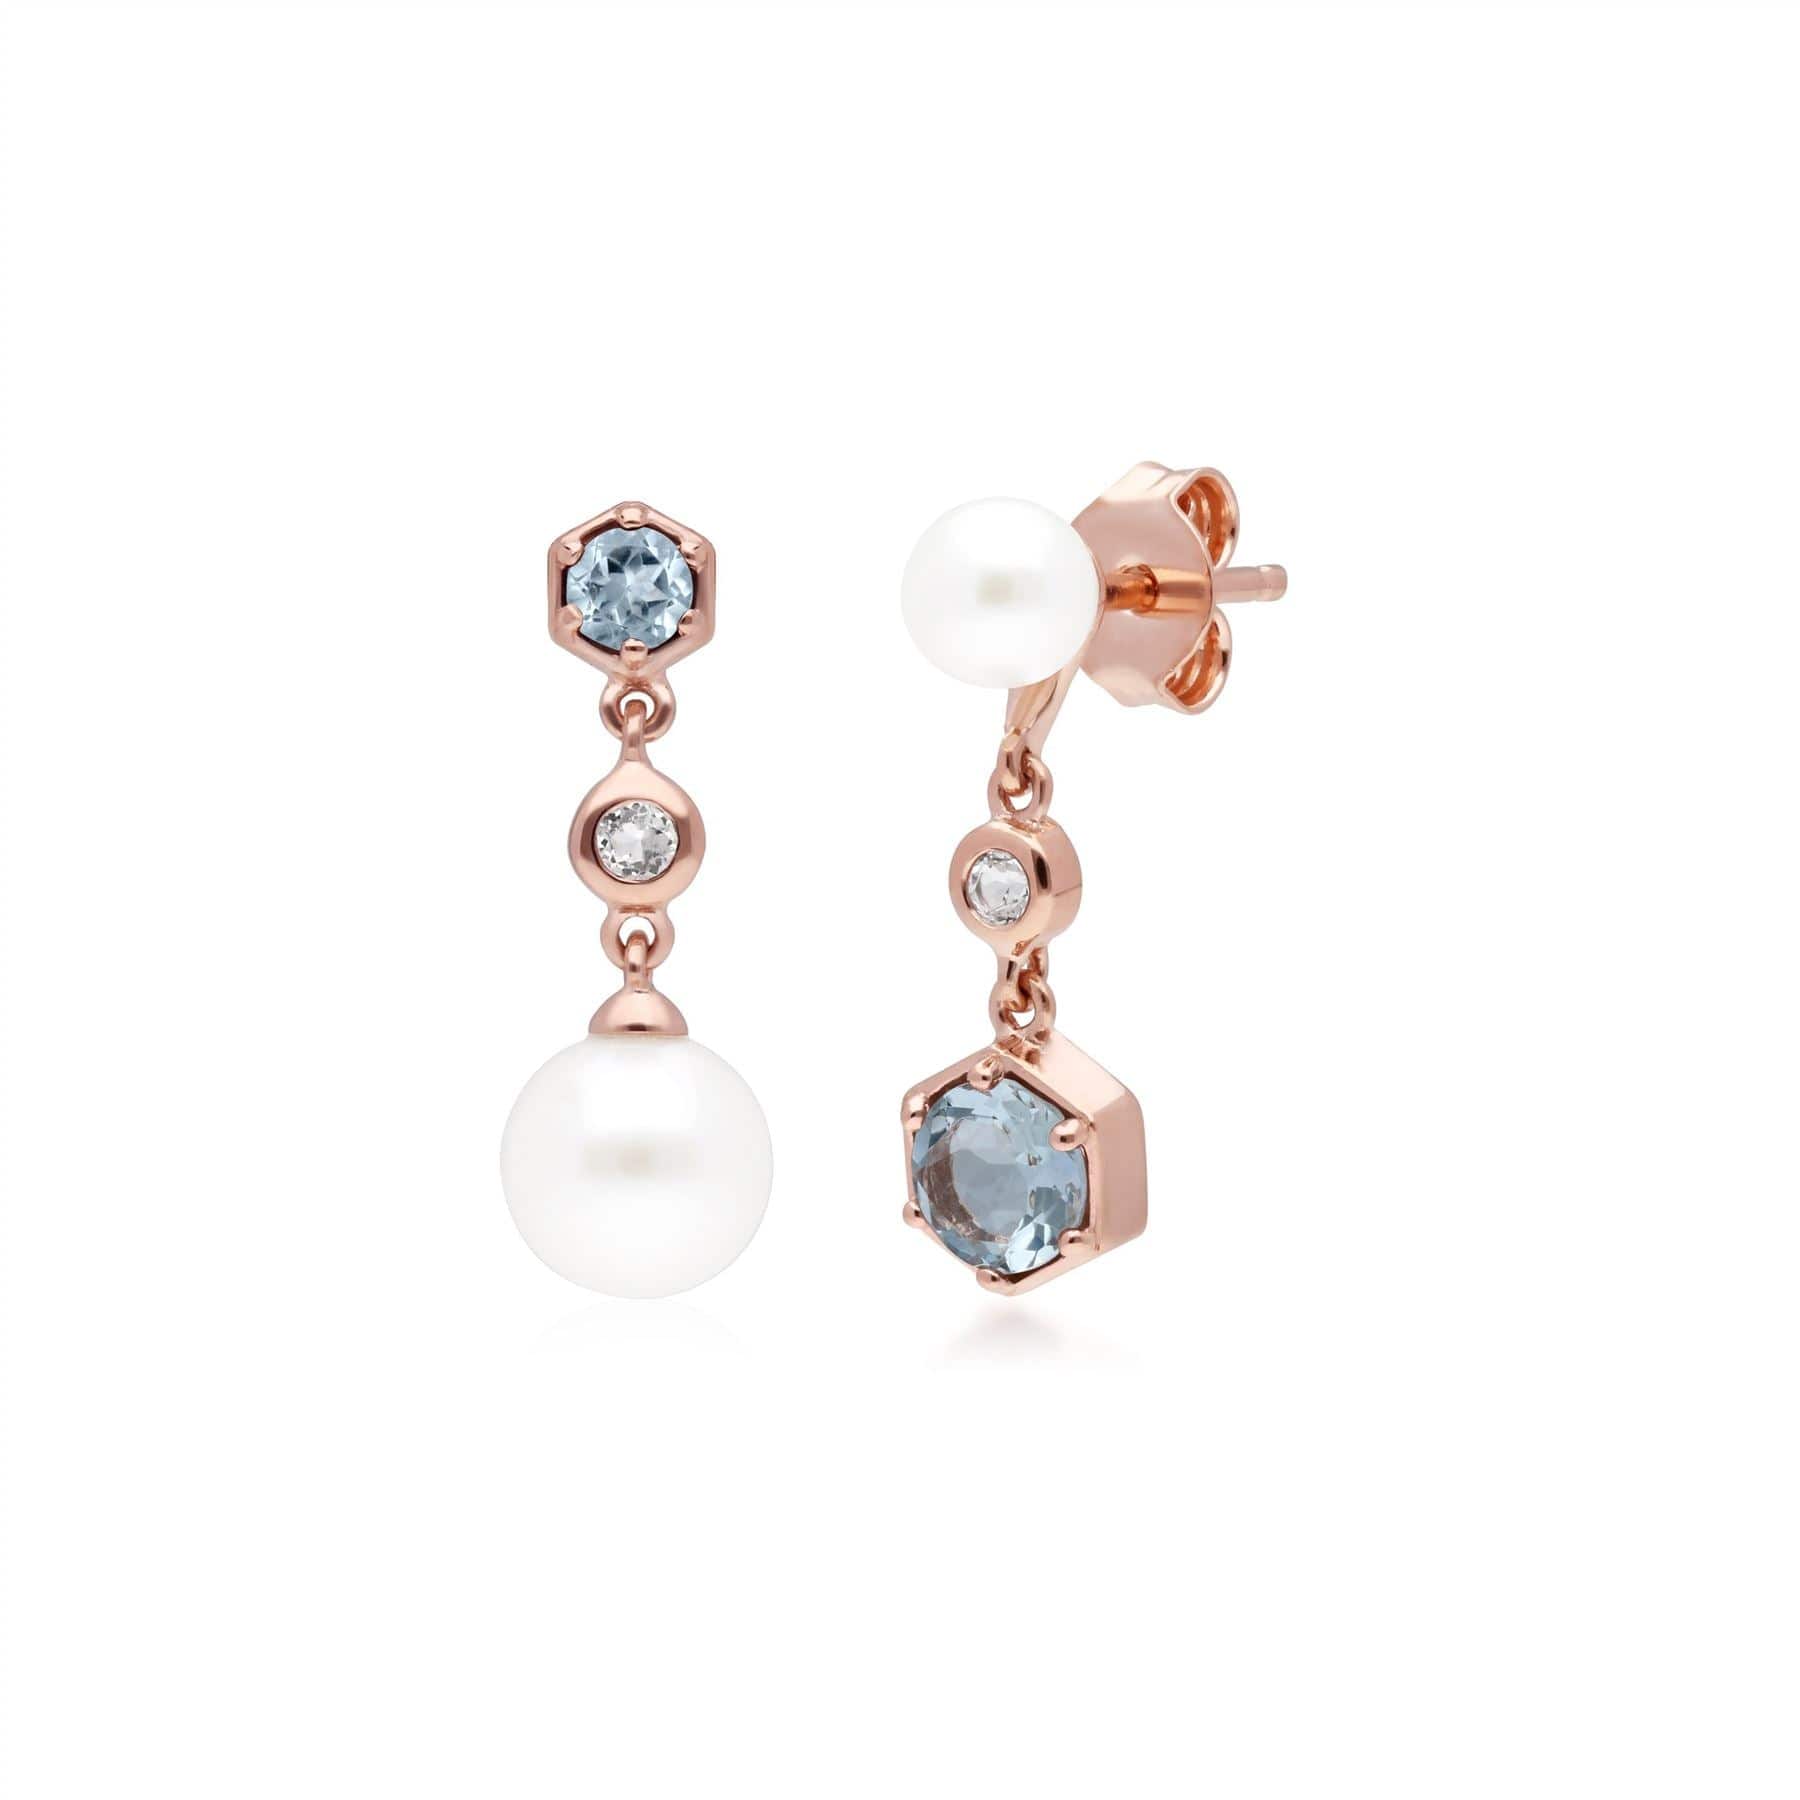 Modern Pearl, Aquamarine & Topaz Mismatched Drop Earrings in Rose Gold Plated Sterling Silver